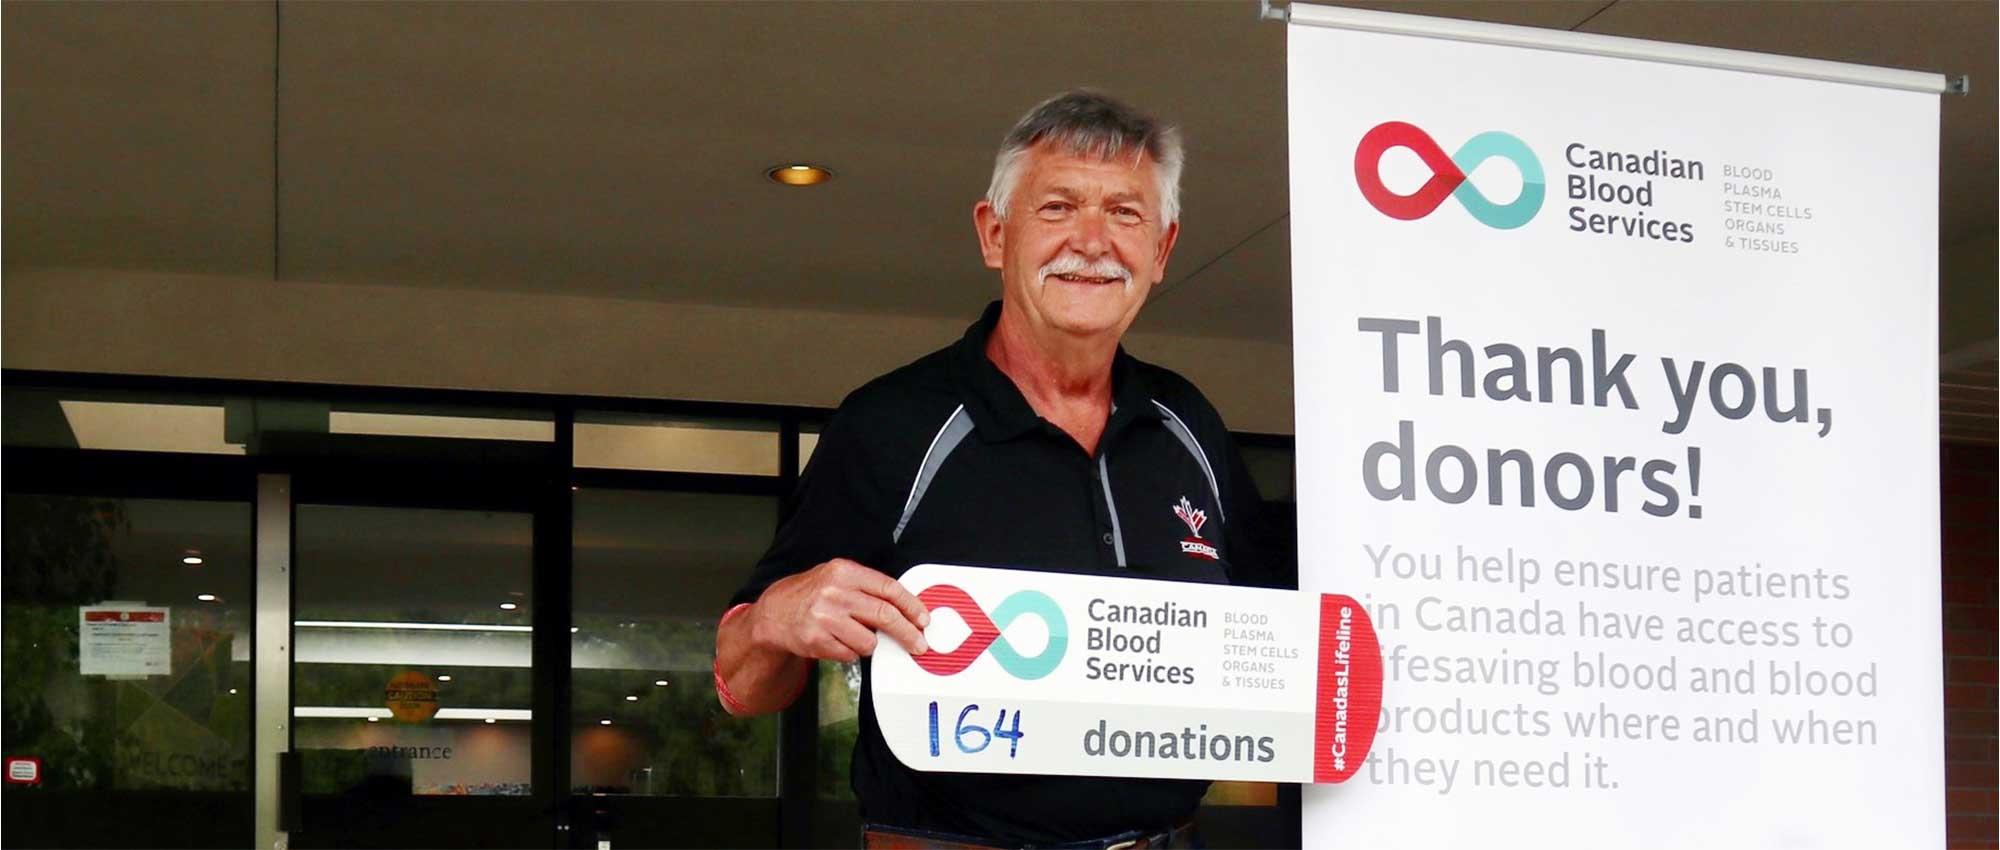 Blood donor stands next to a sign that says Thank you, donors